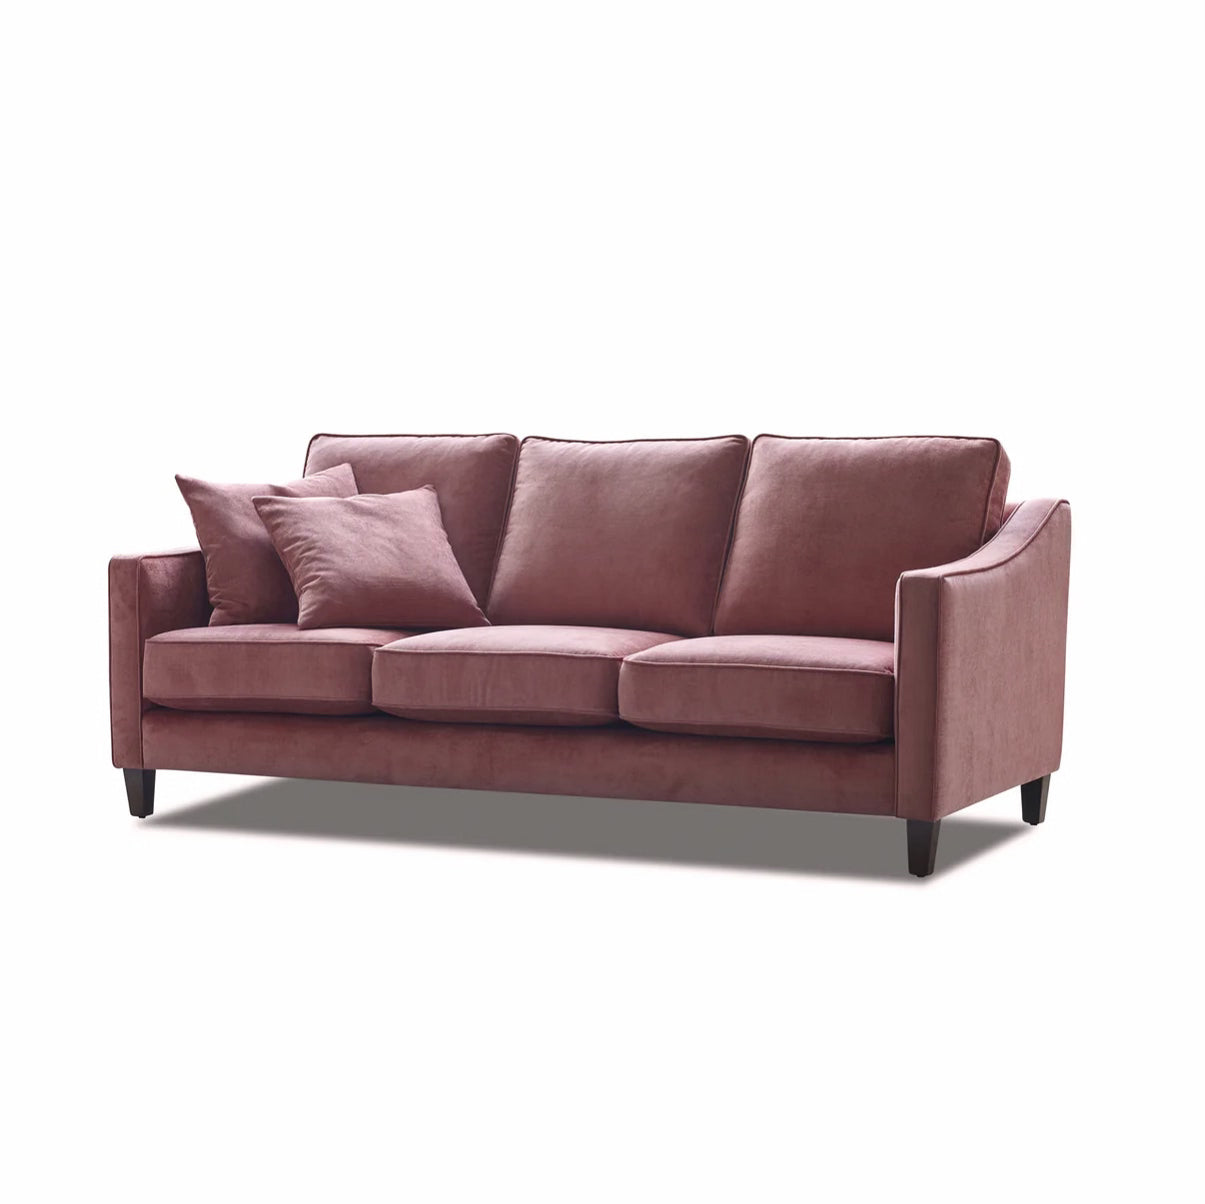 Windsor Sofa by Molmic available from Make Your House A Home, Furniture Store located in Bendigo, Victoria. Australian Made in Melbourne. Hanley Sofa